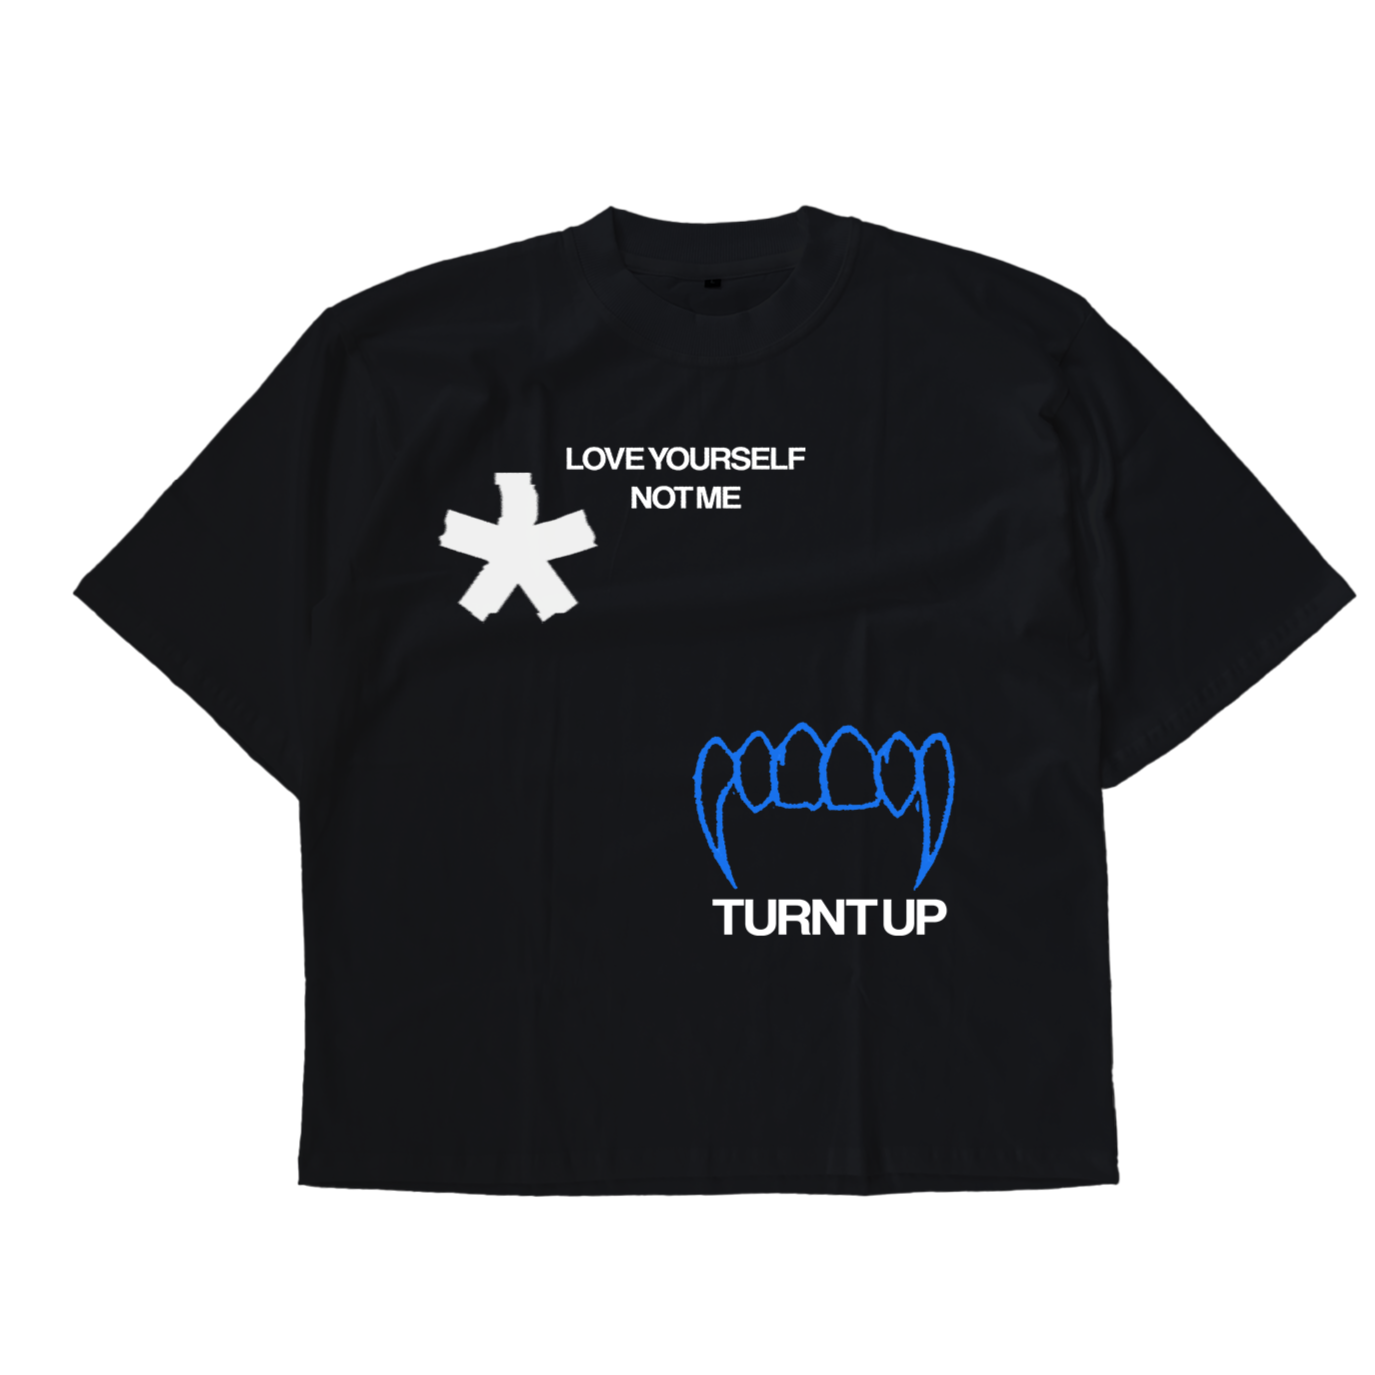 THE LOVE OVERSIZED T-SHIRT - TURNT UP CLOTHING